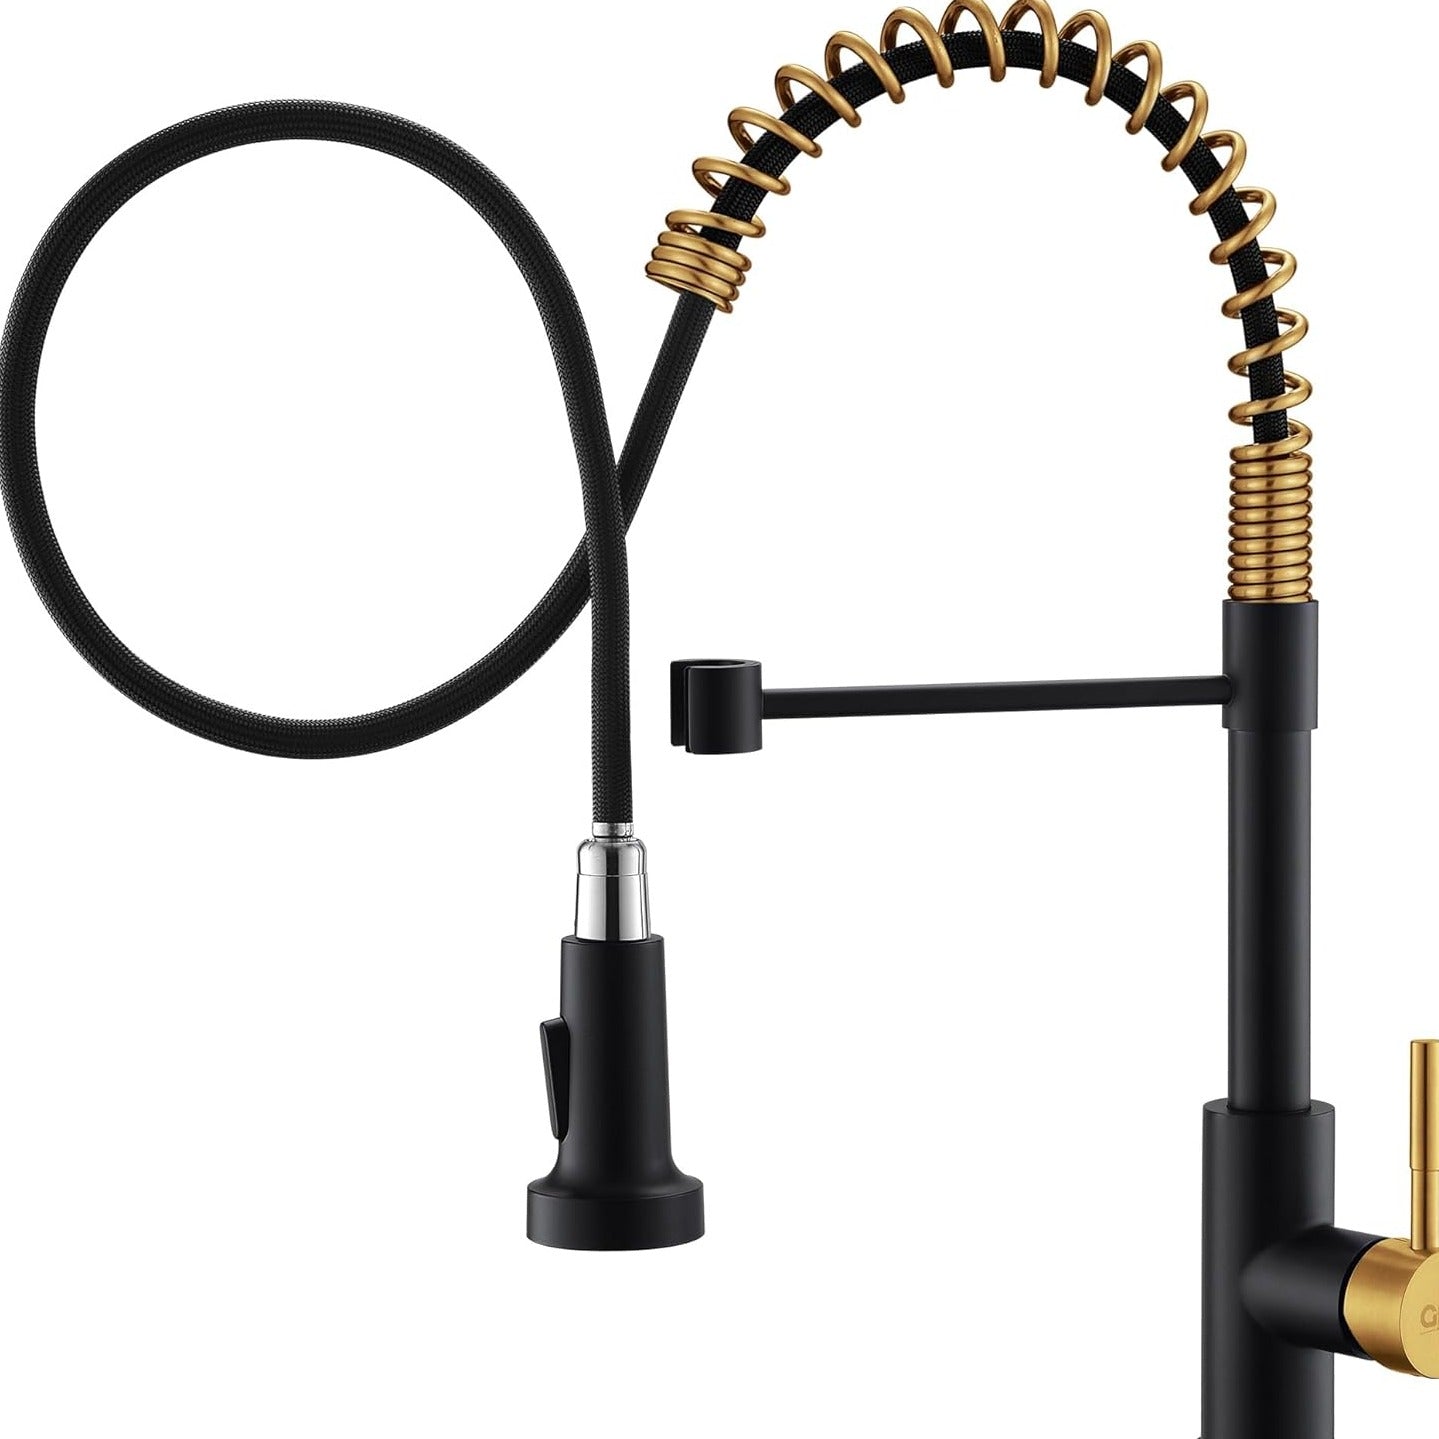 A|M Aquae Black and Gold Touch Kitchen Faucet with Pull Down Sprayer Black & Gold